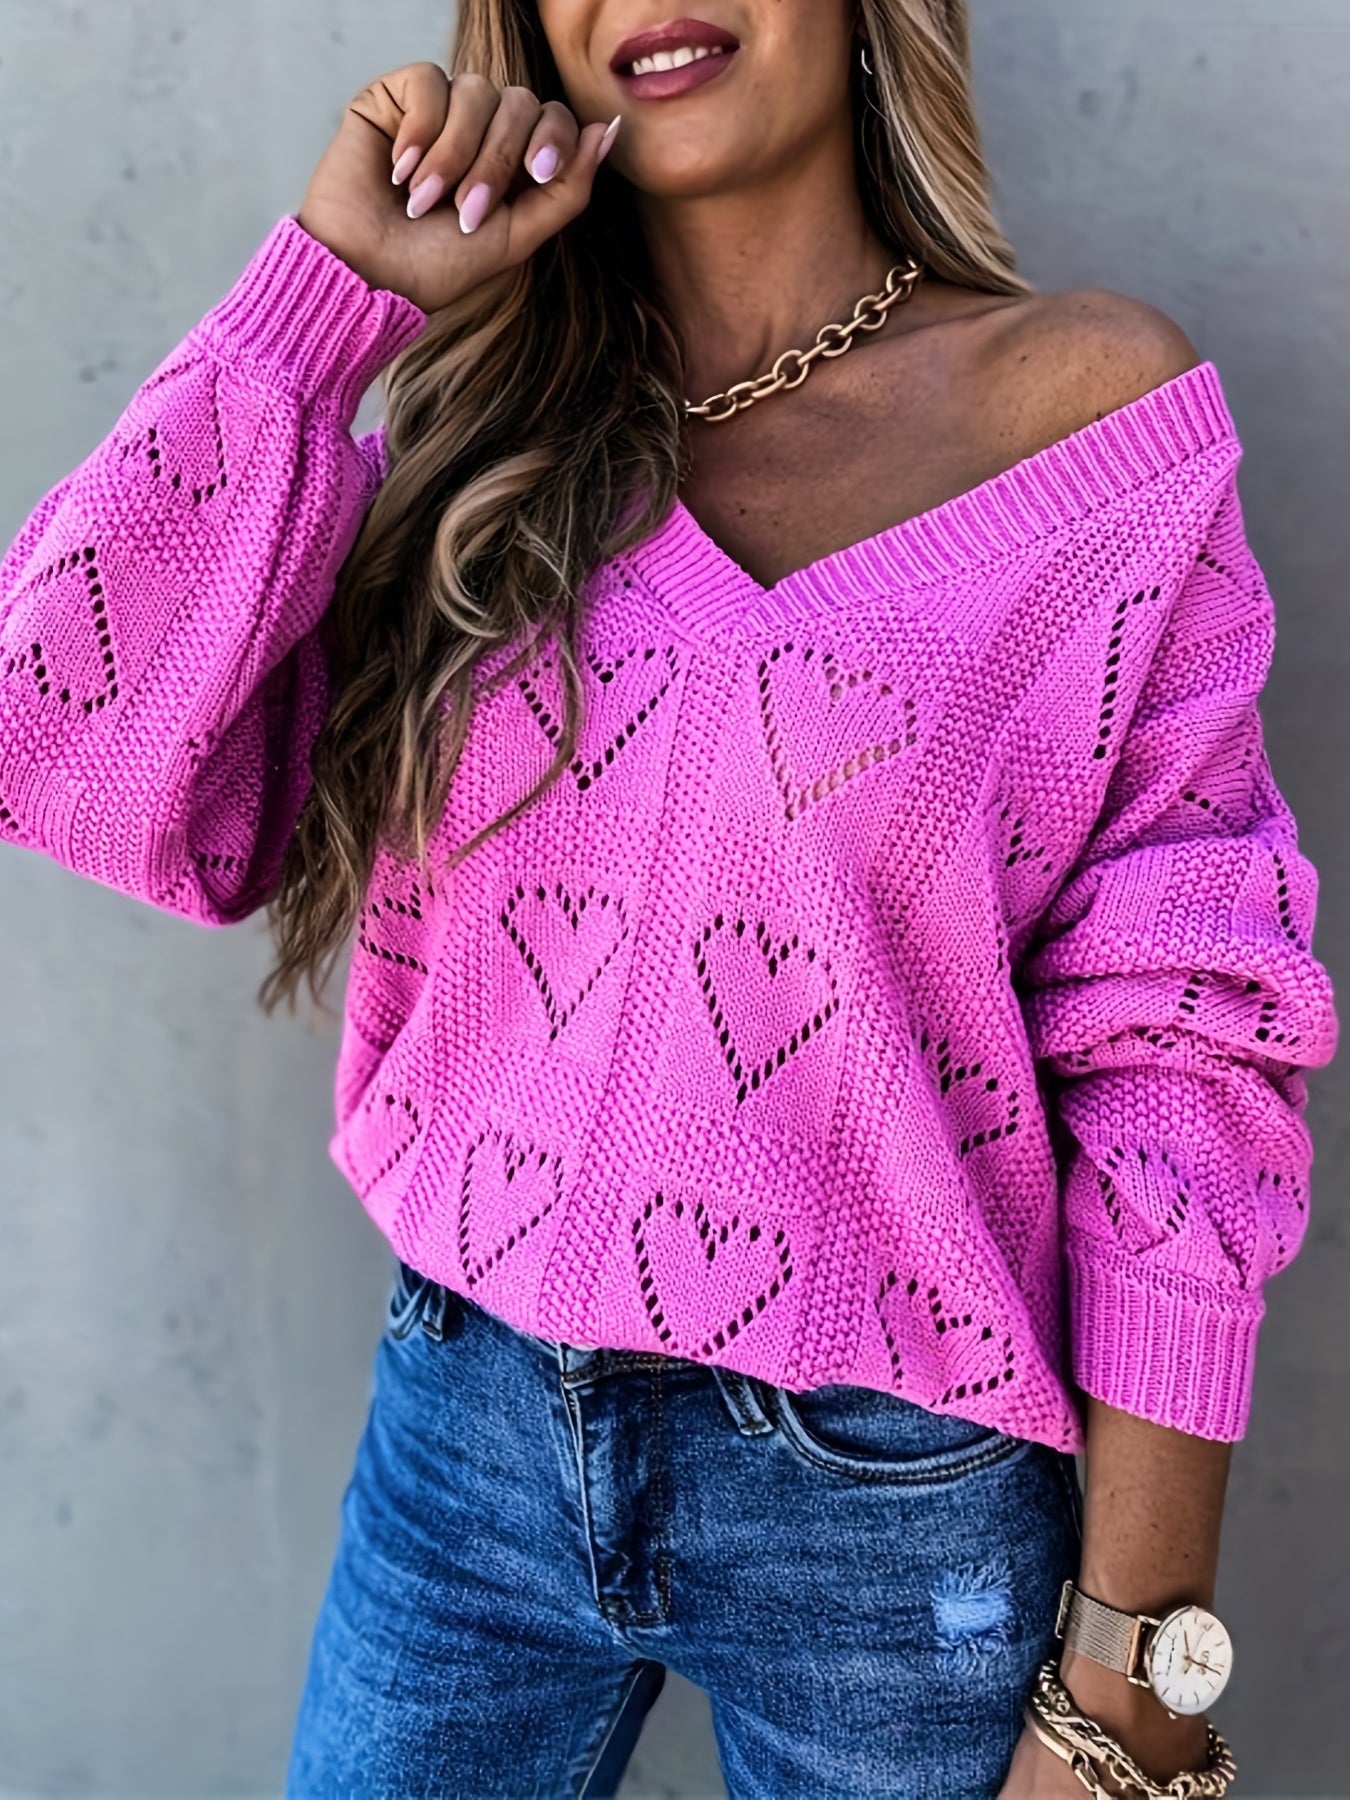 Antmvs Heart Pattern Cut Out V Neck Sweater, Casual Long Sleeve Sweater For Fall & Winter, Women's Clothing